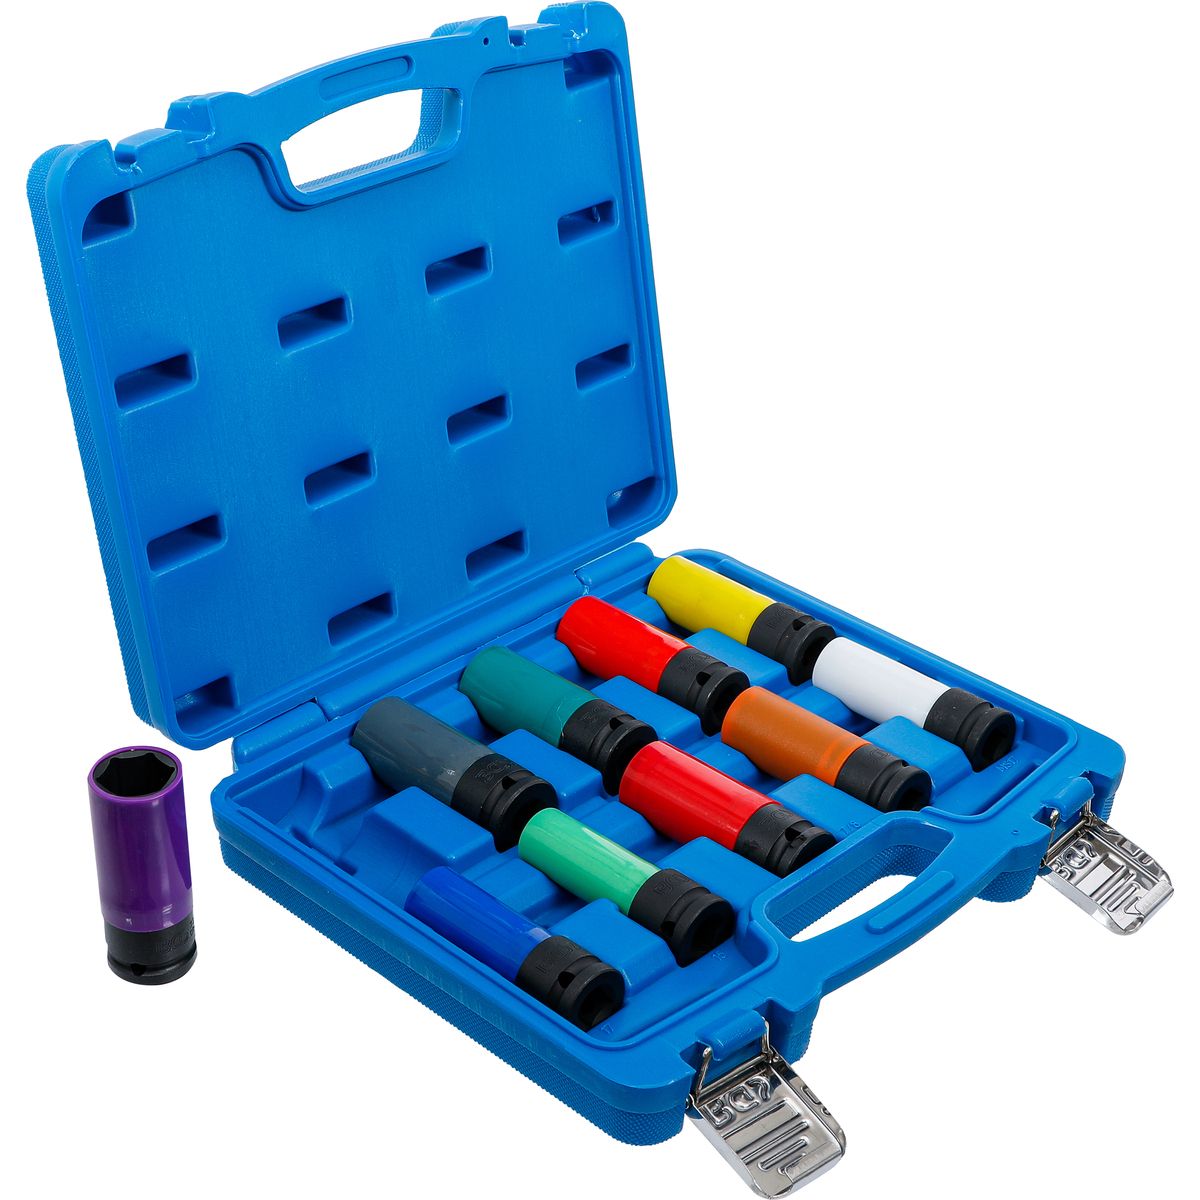 Protective Impact Socket Set | 12.5 mm (1/2") Drive | 15 - 24 mm and Special Wheel Nuts | 10 pcs.